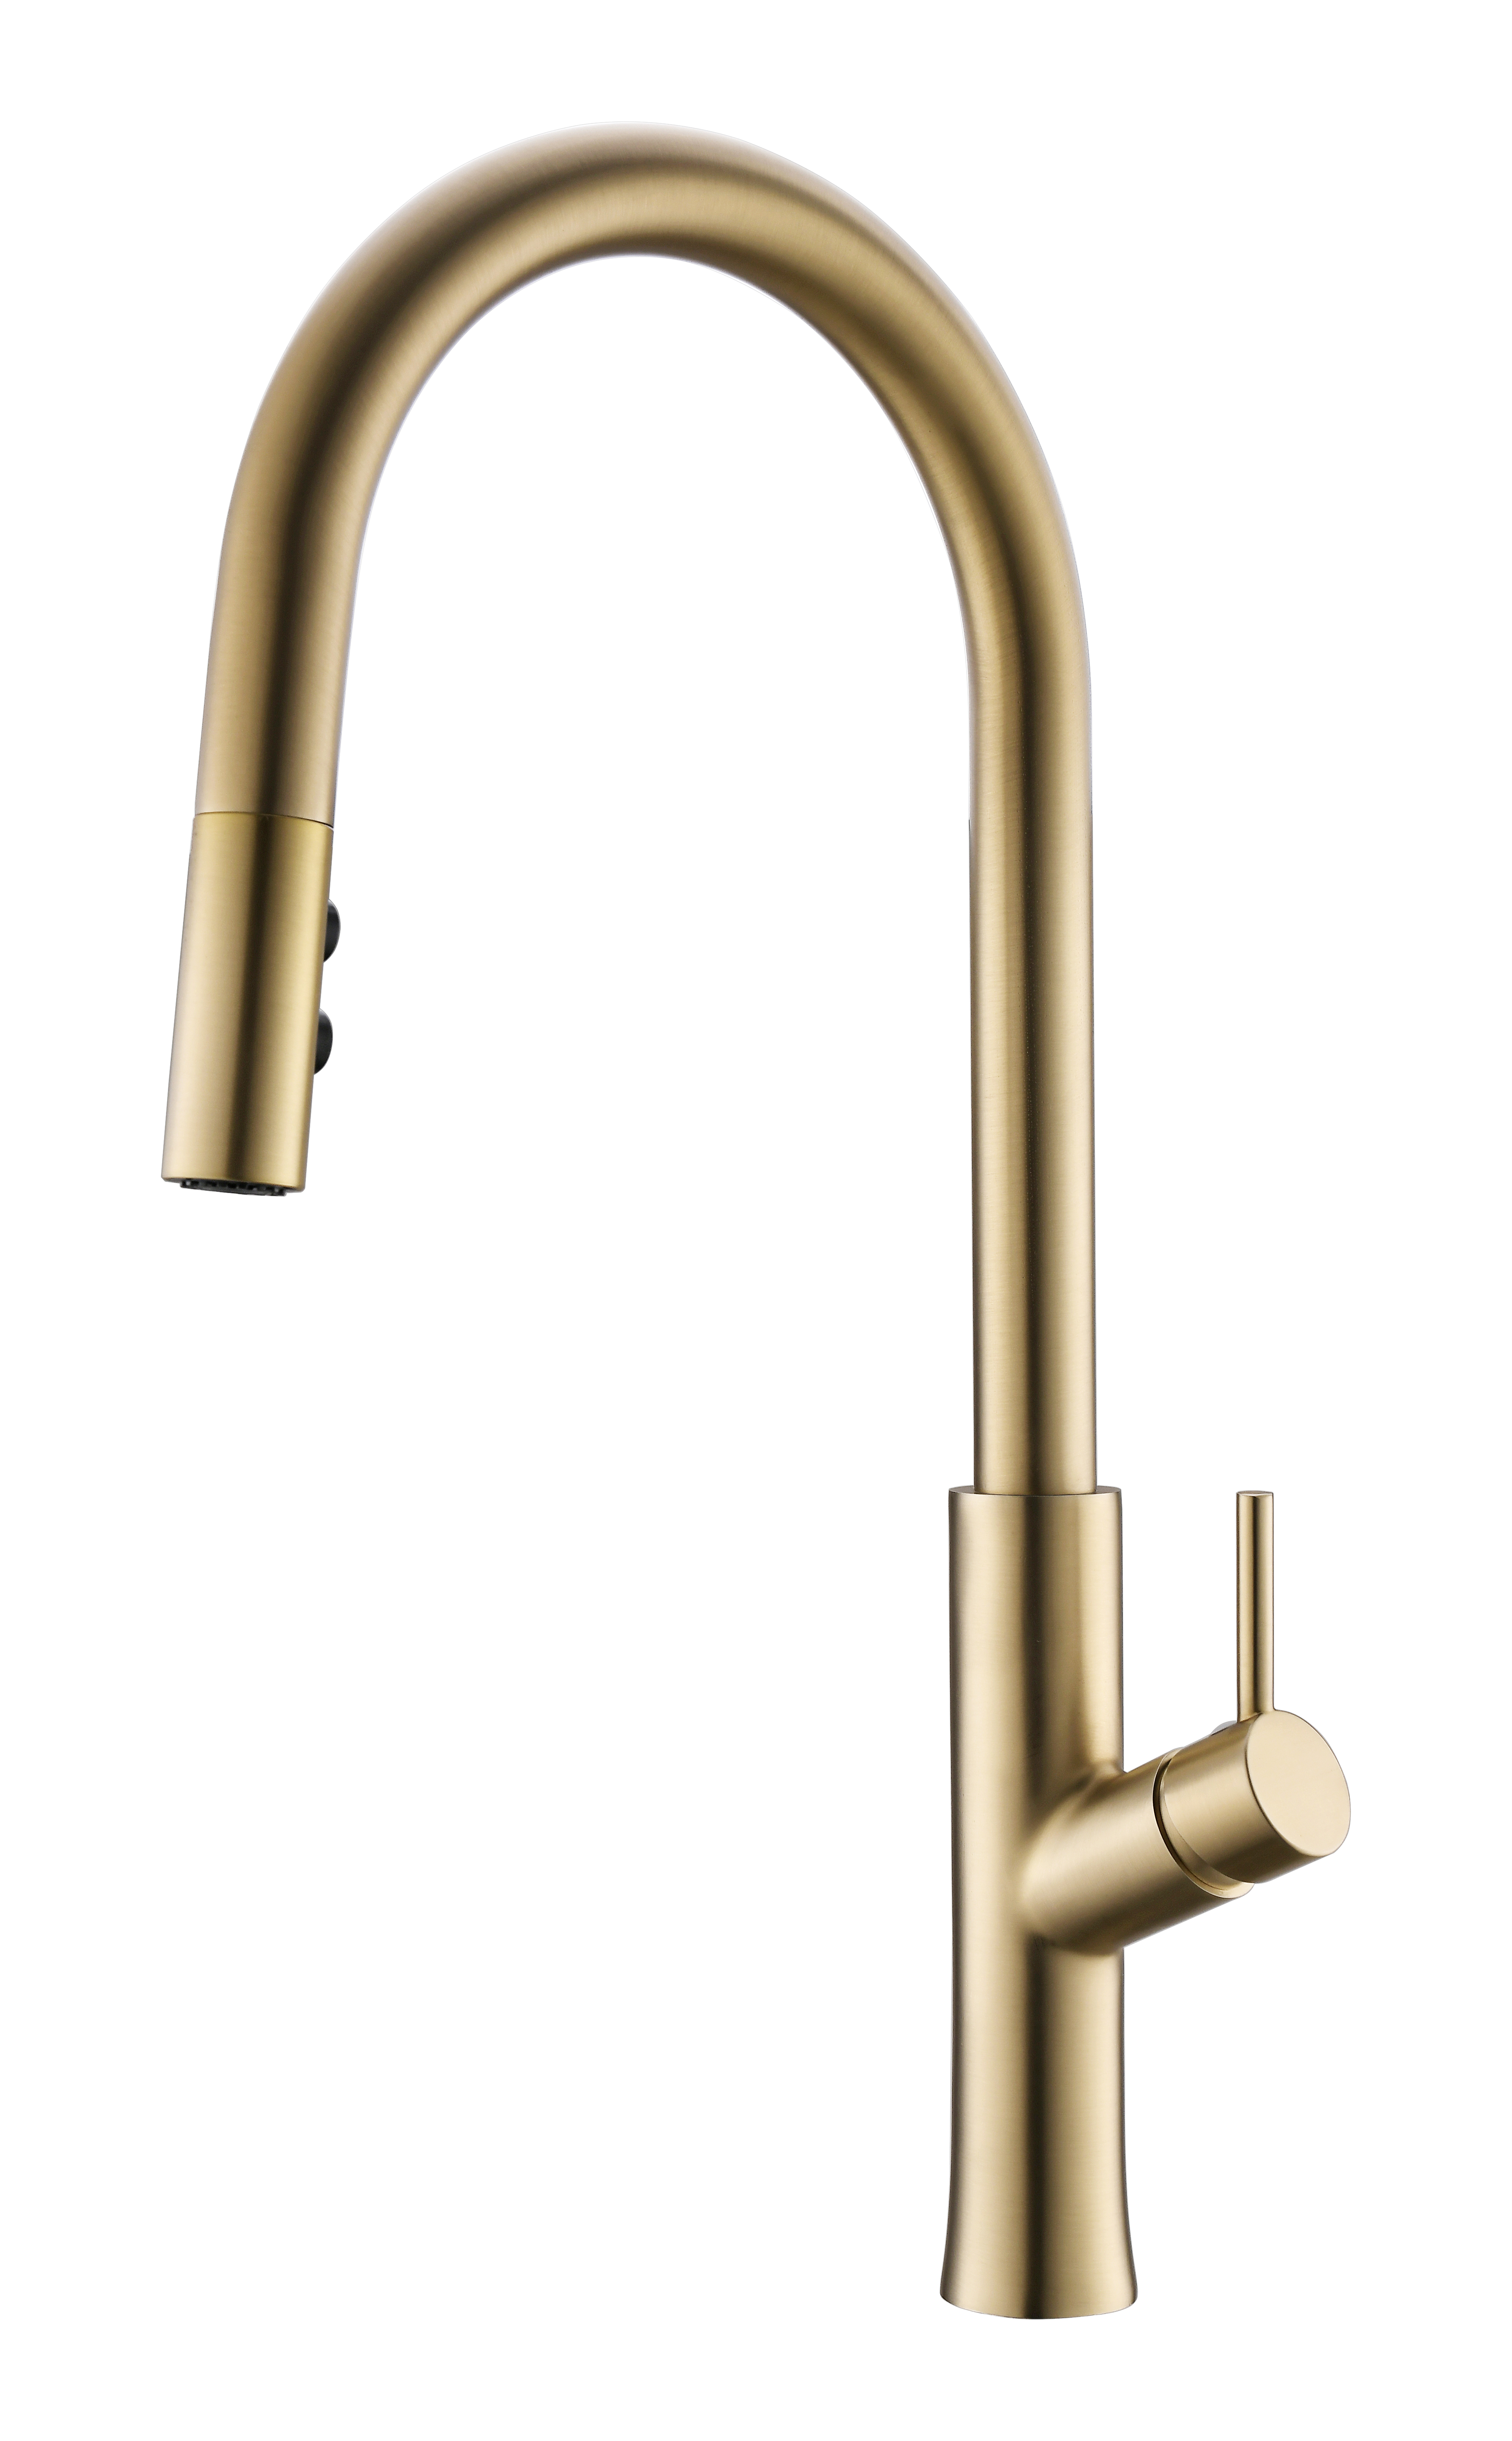 Cartridge Single Handle Brass Pull Down Kitchen Faucet with Sprayer